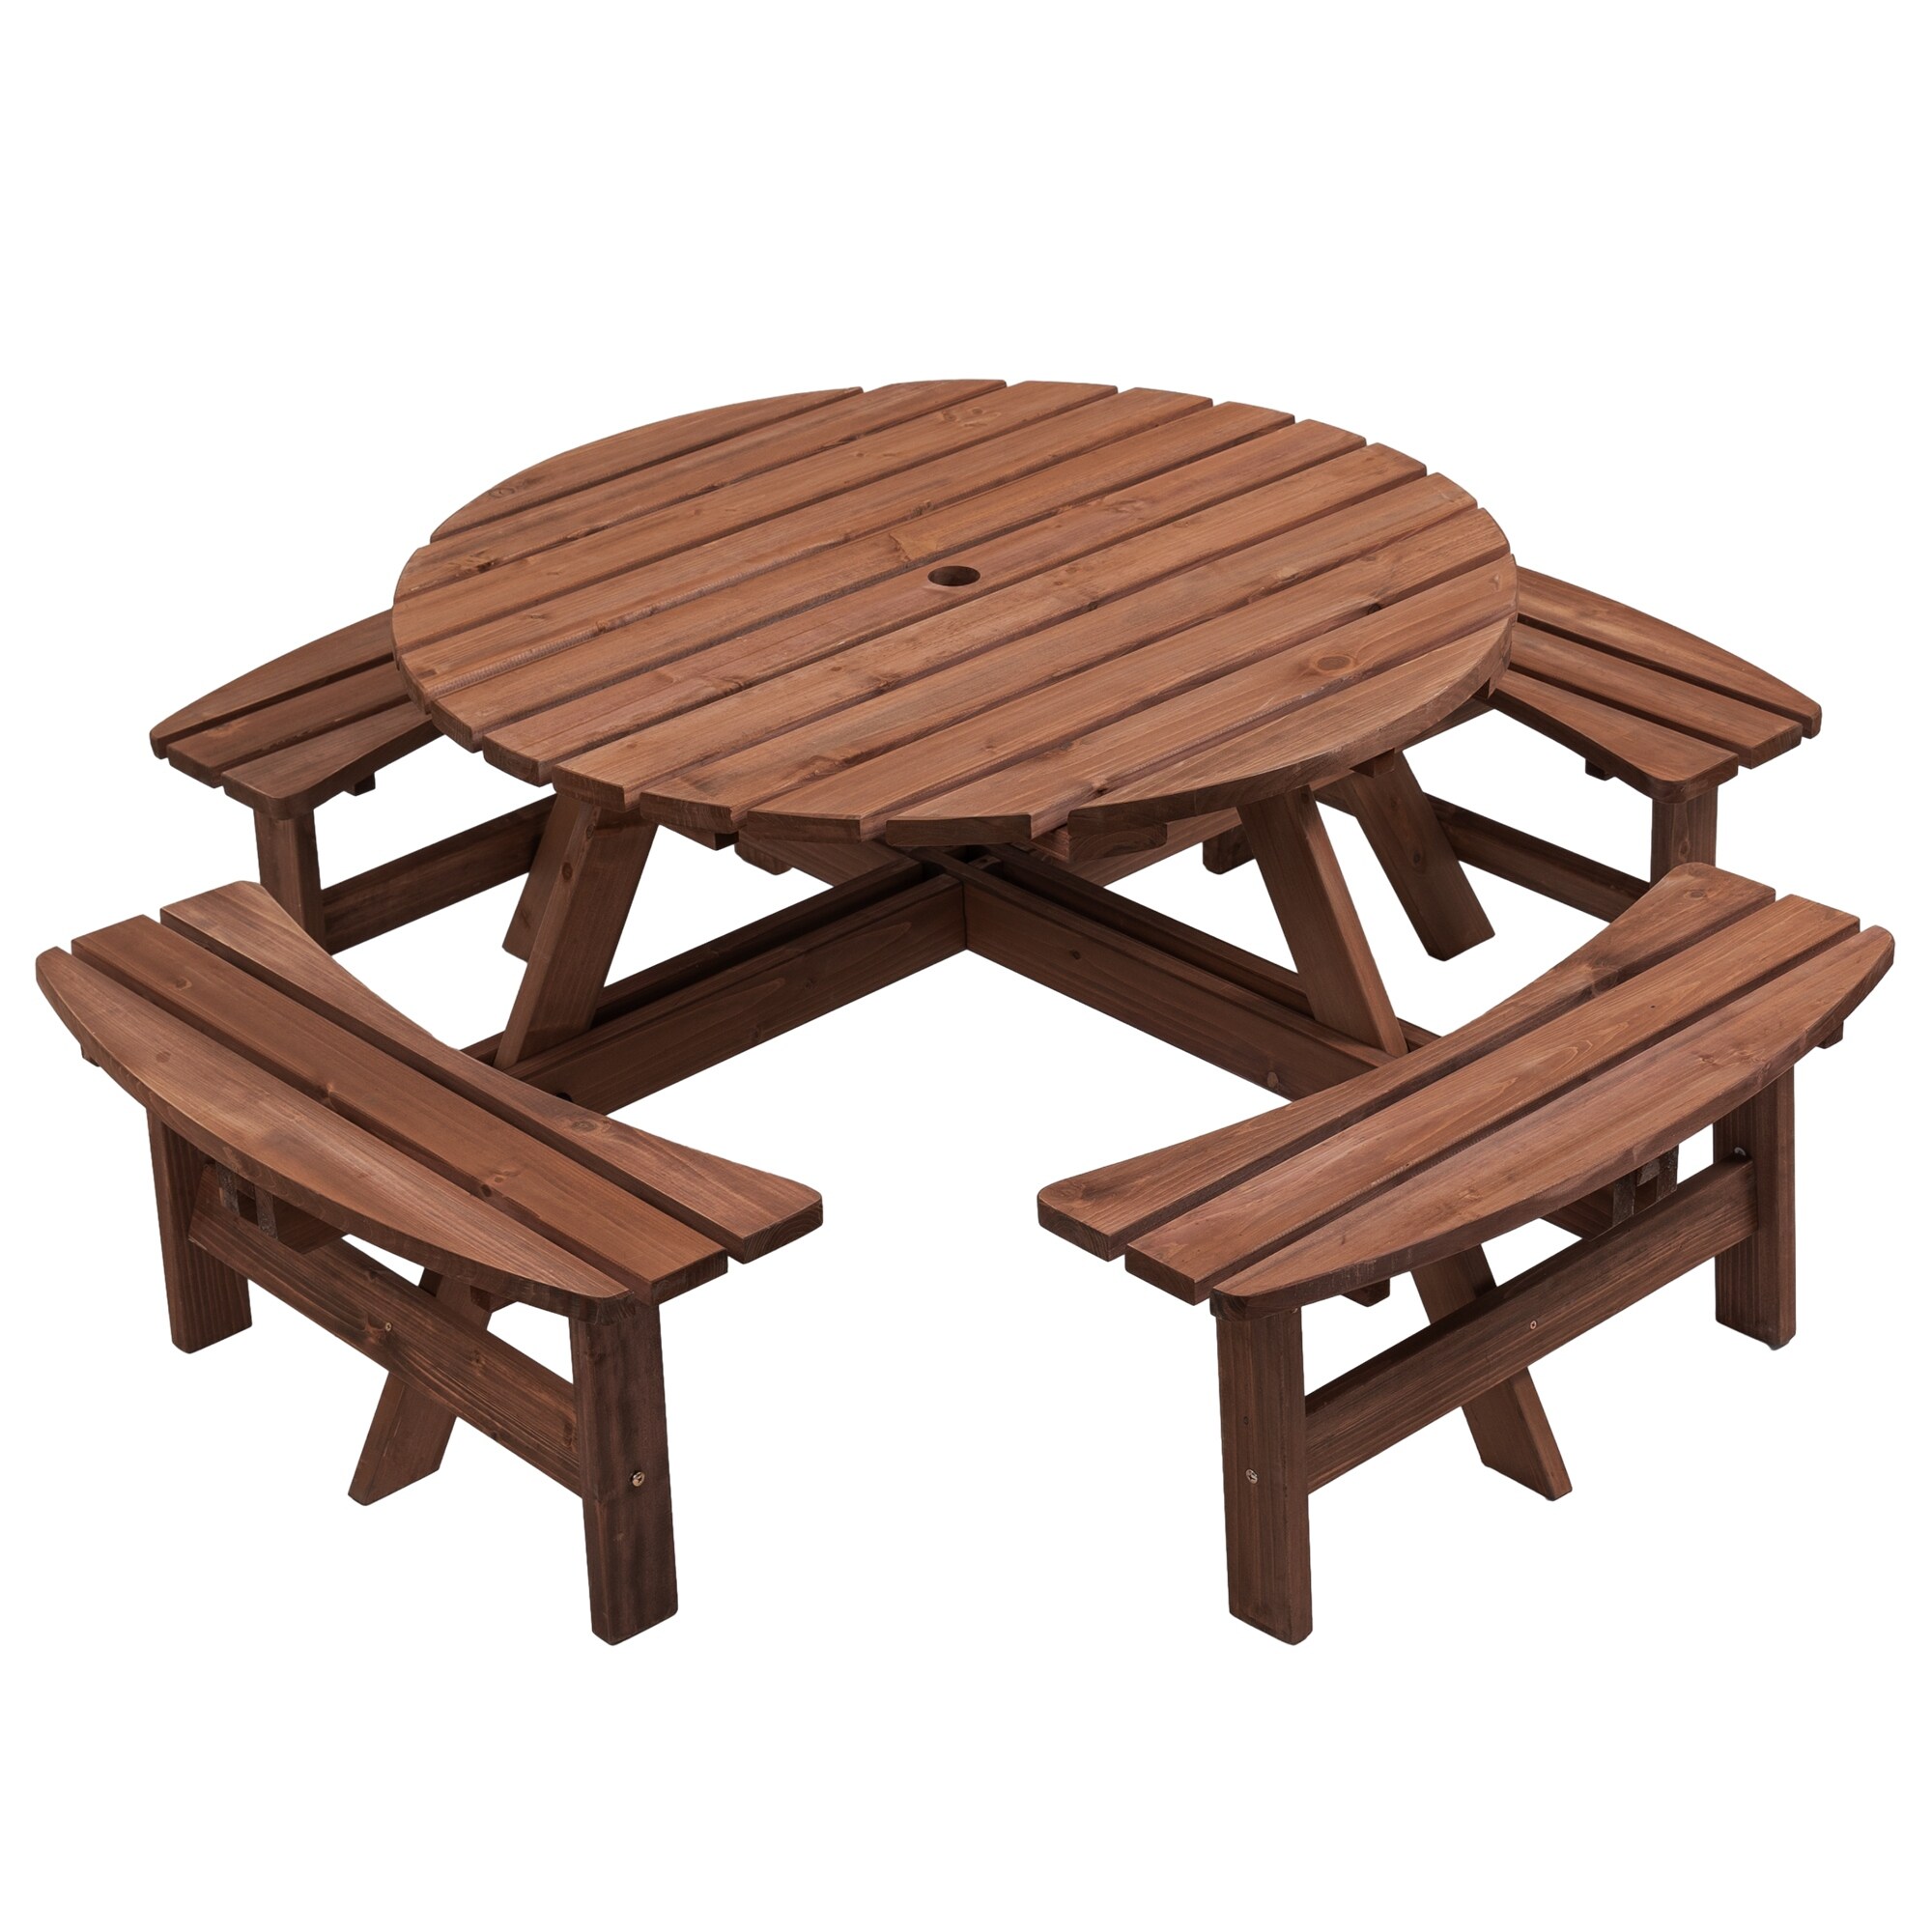 8 Person Wooden Picnic Table Outdoor Dining Table Set With Seat And Umbrella Hole For Patio  Backyard